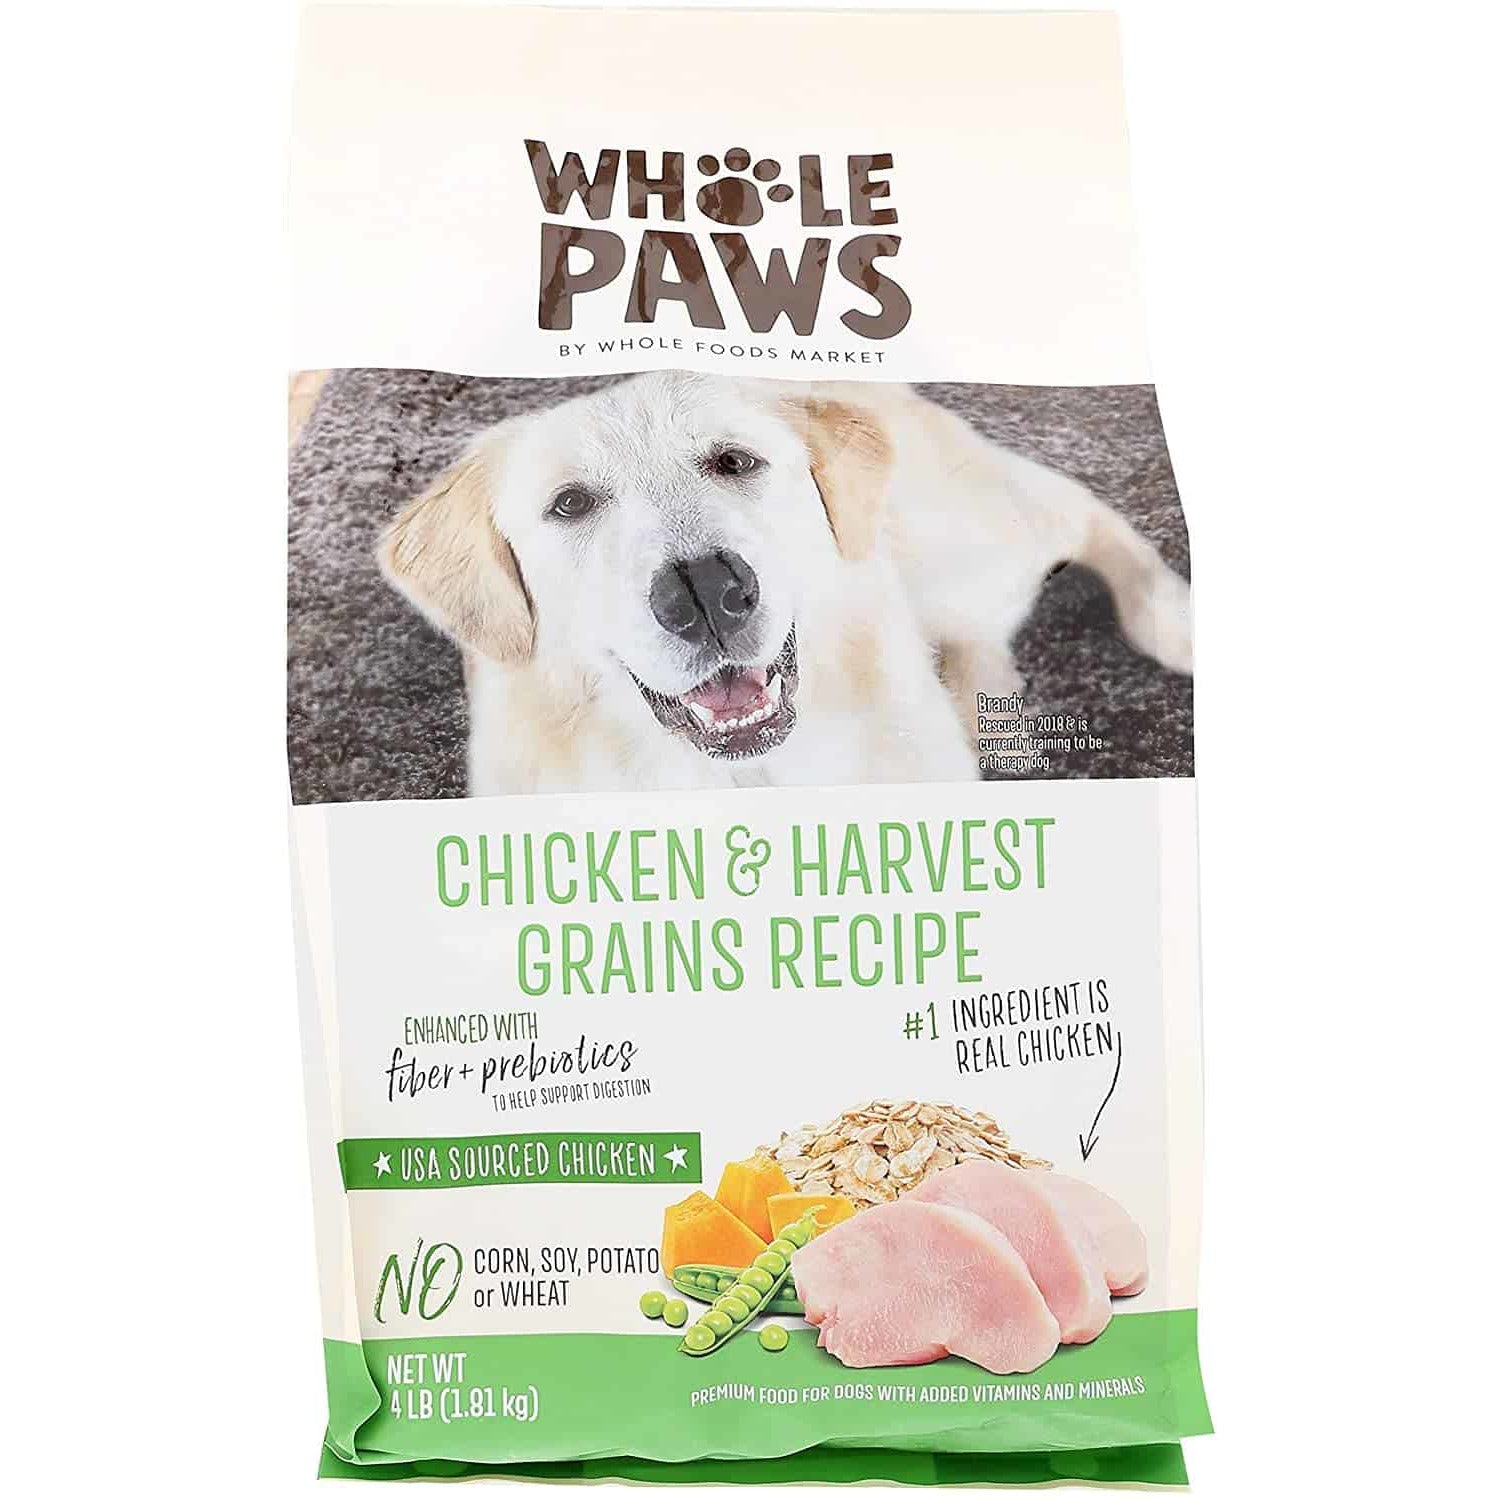 Whole Paws Dog Food, Chicken & Harvest Grains Recipe, 4 Lb.